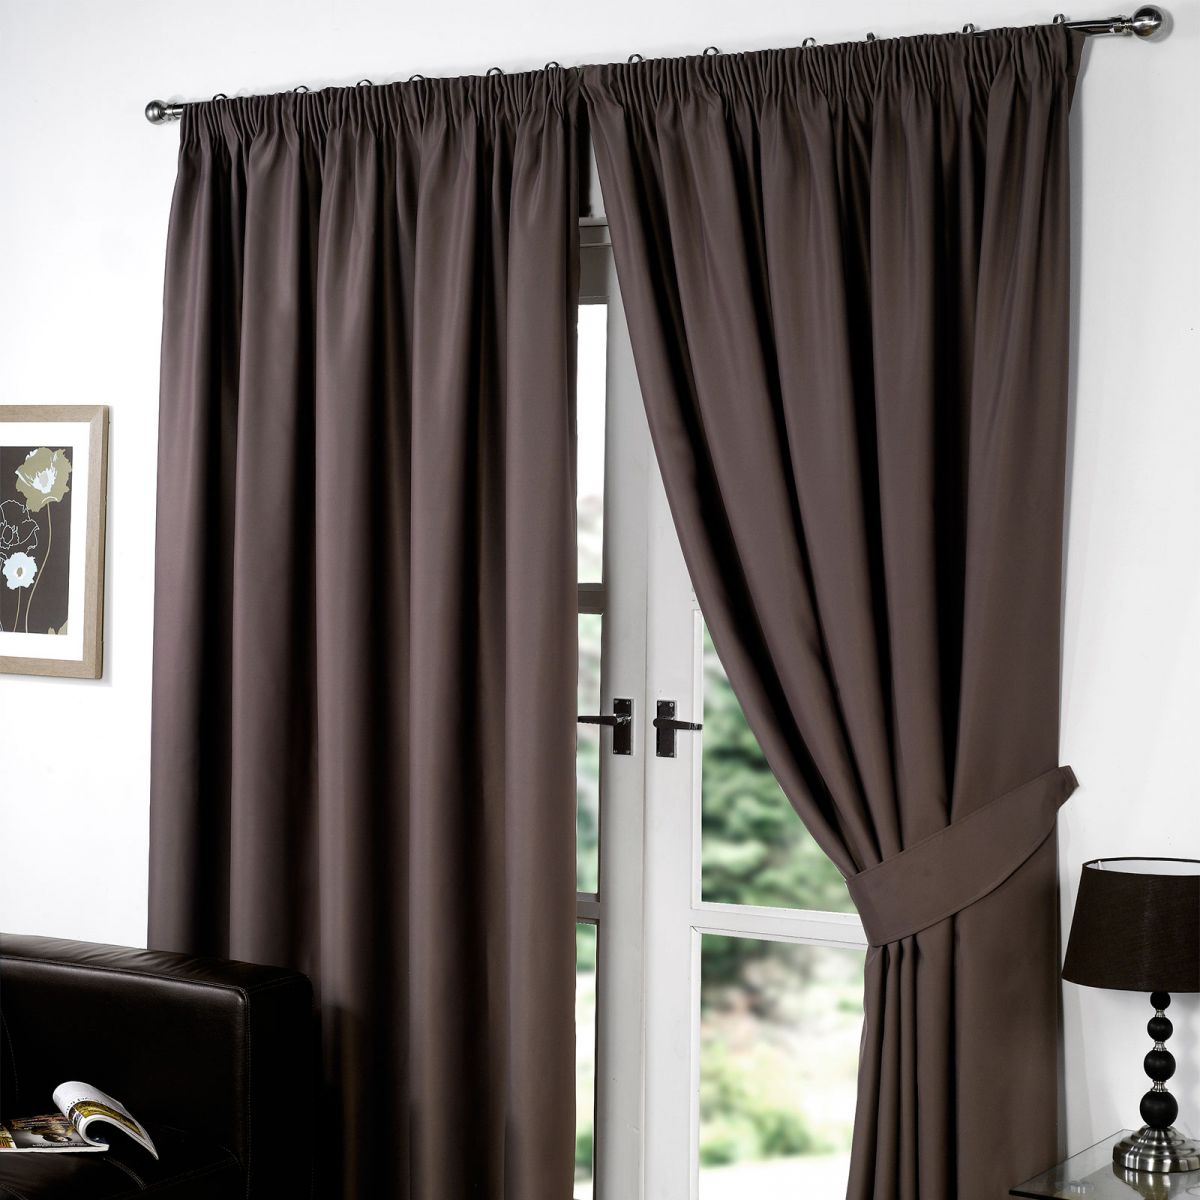 Pencil Pleat Thermal Blackout Fully Lined Curtains - Chocolate 46x72